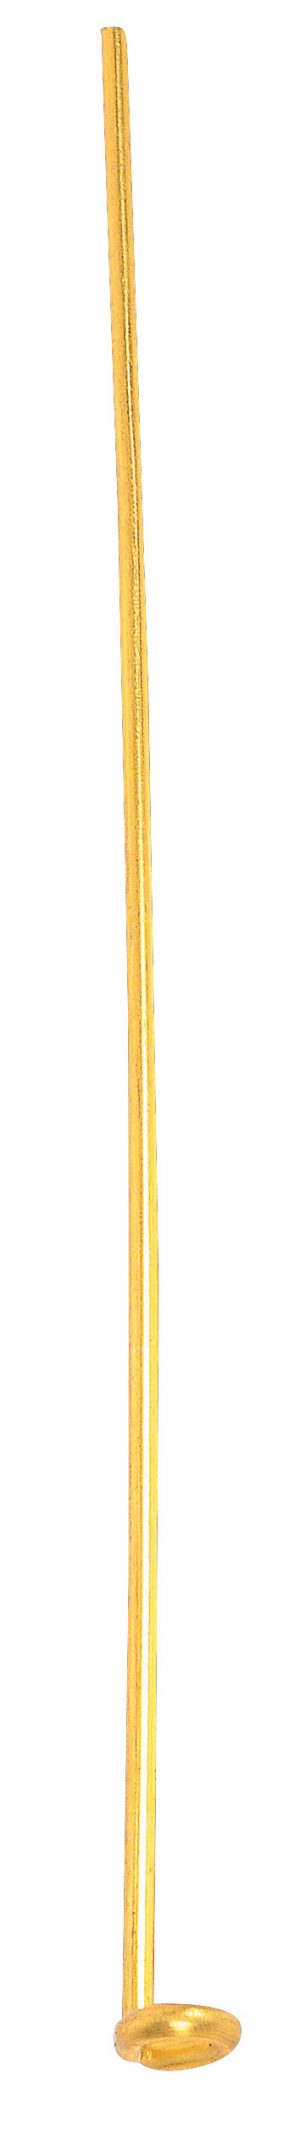 A slender, vertical gold-tone candlestick on a white background.